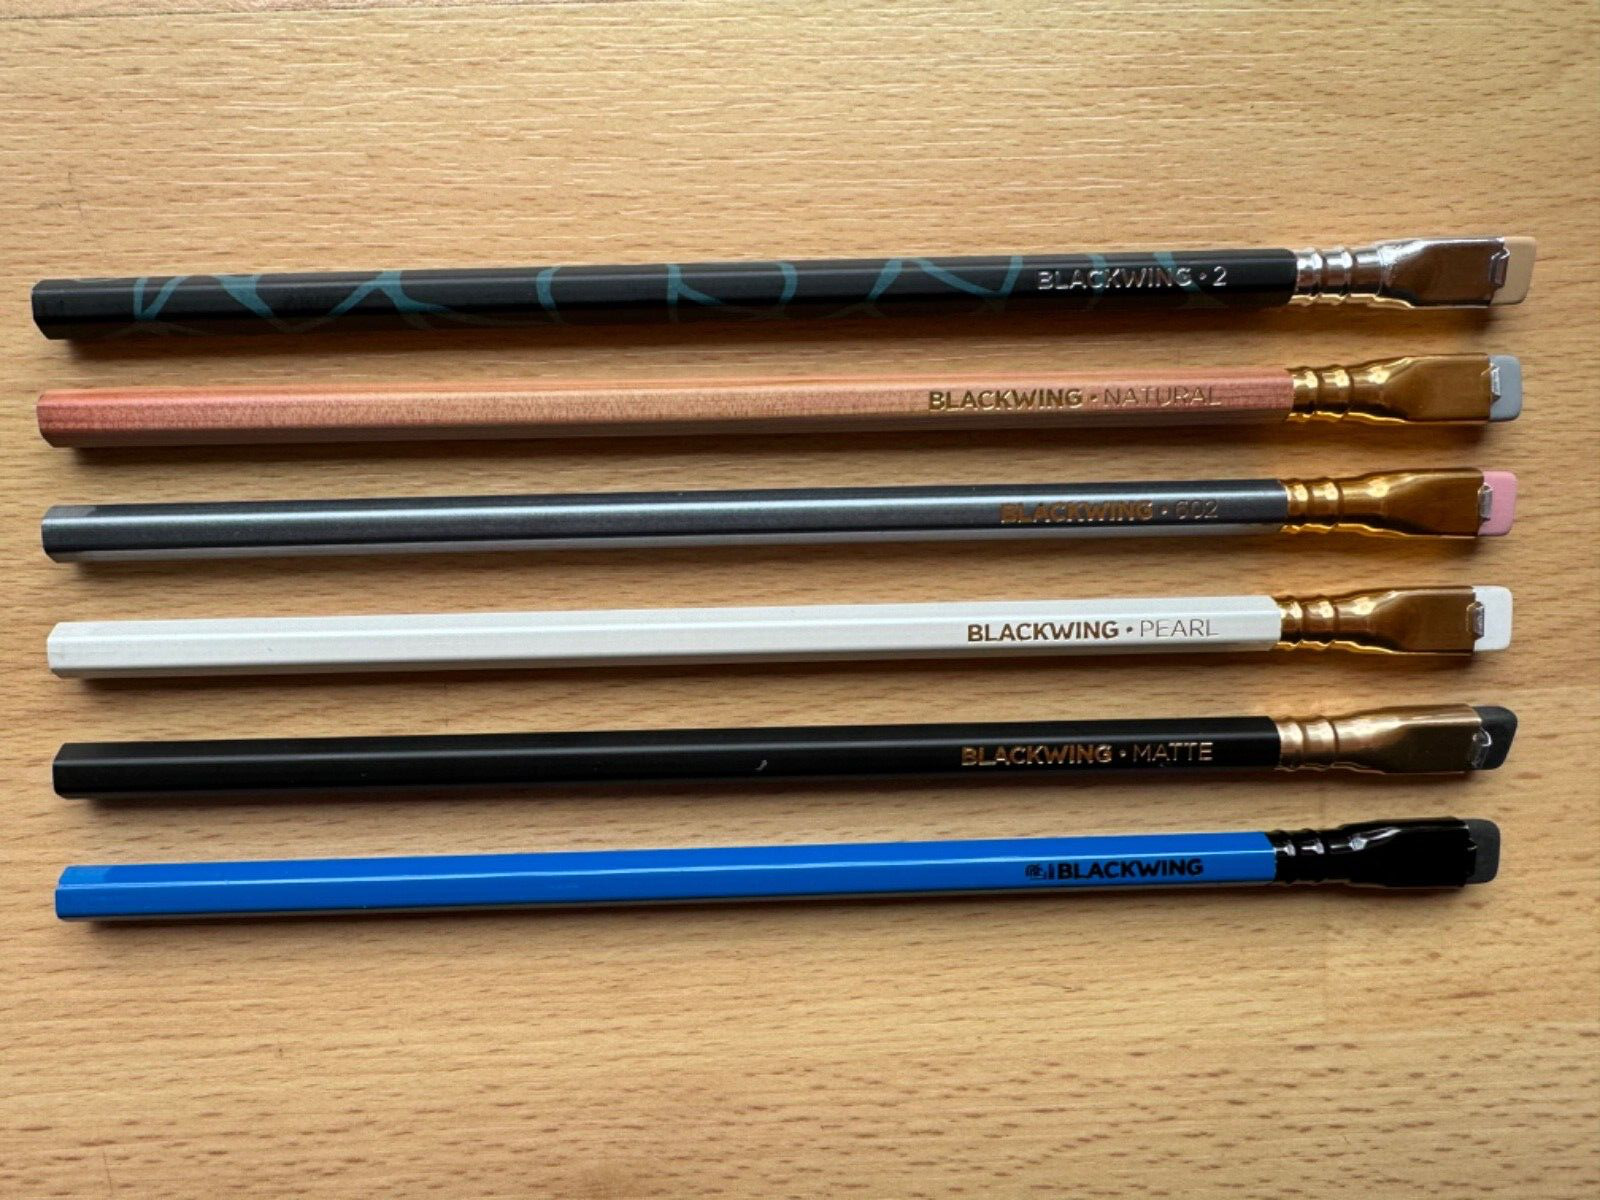 Blackwing Sampler of 6 cores: 6 Pencils (no Boxes)